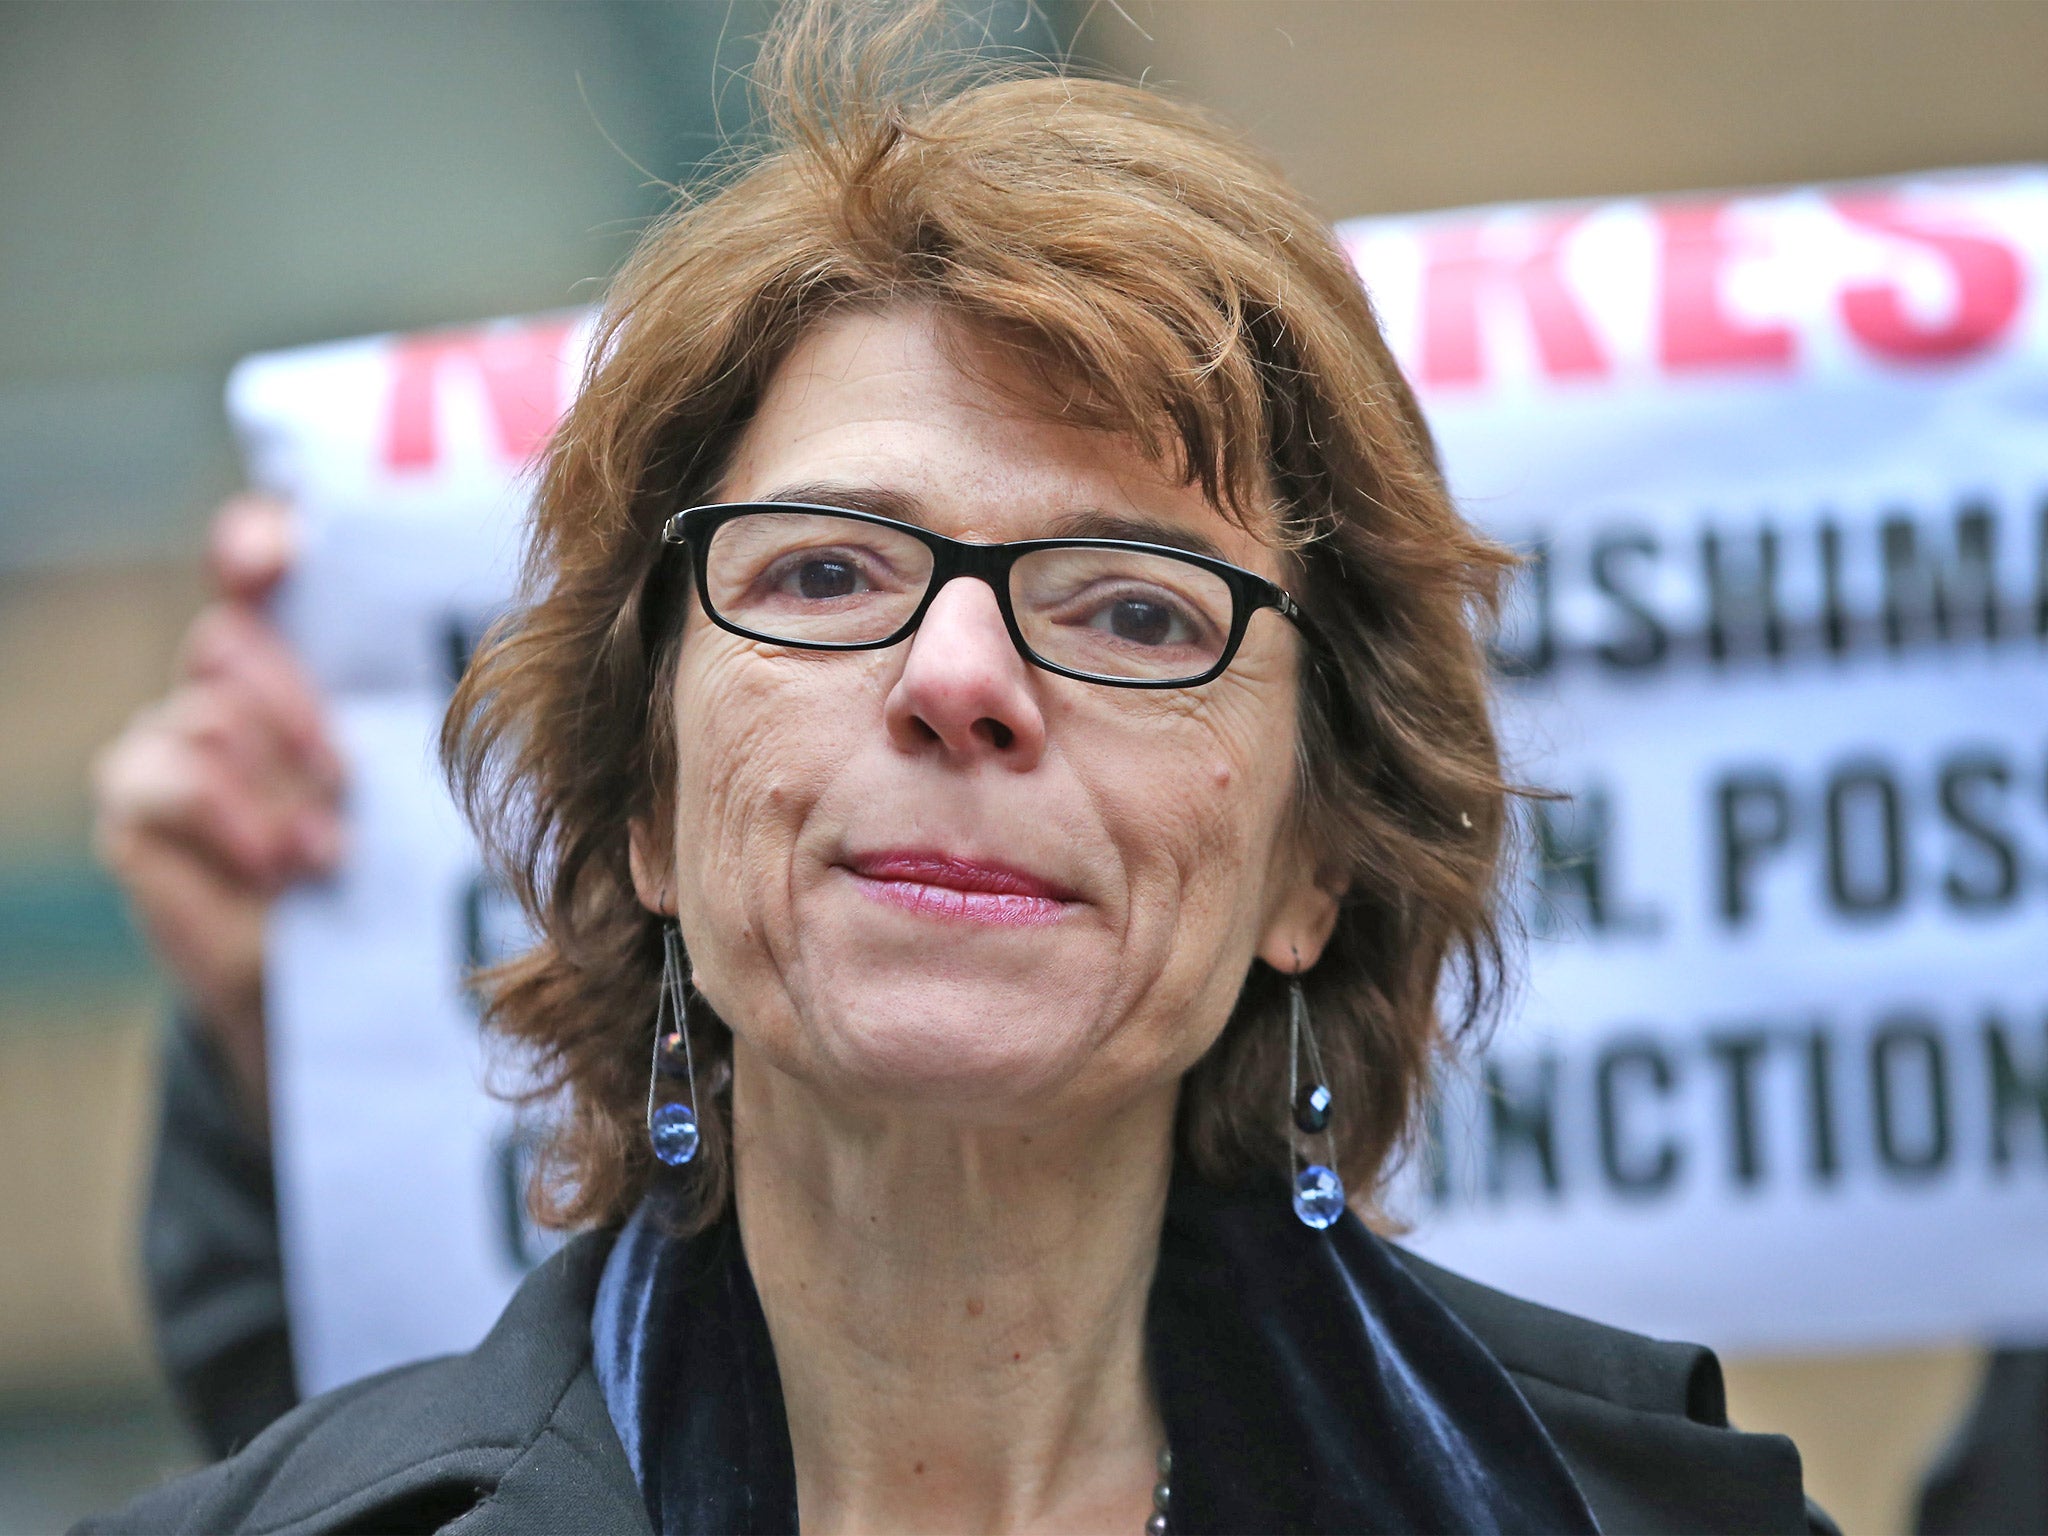 Vicky Pryce, ex-wife of former Liberal Democrat cabinet minister Chris Huhne, arrives at Southwark Crown Court yesterday